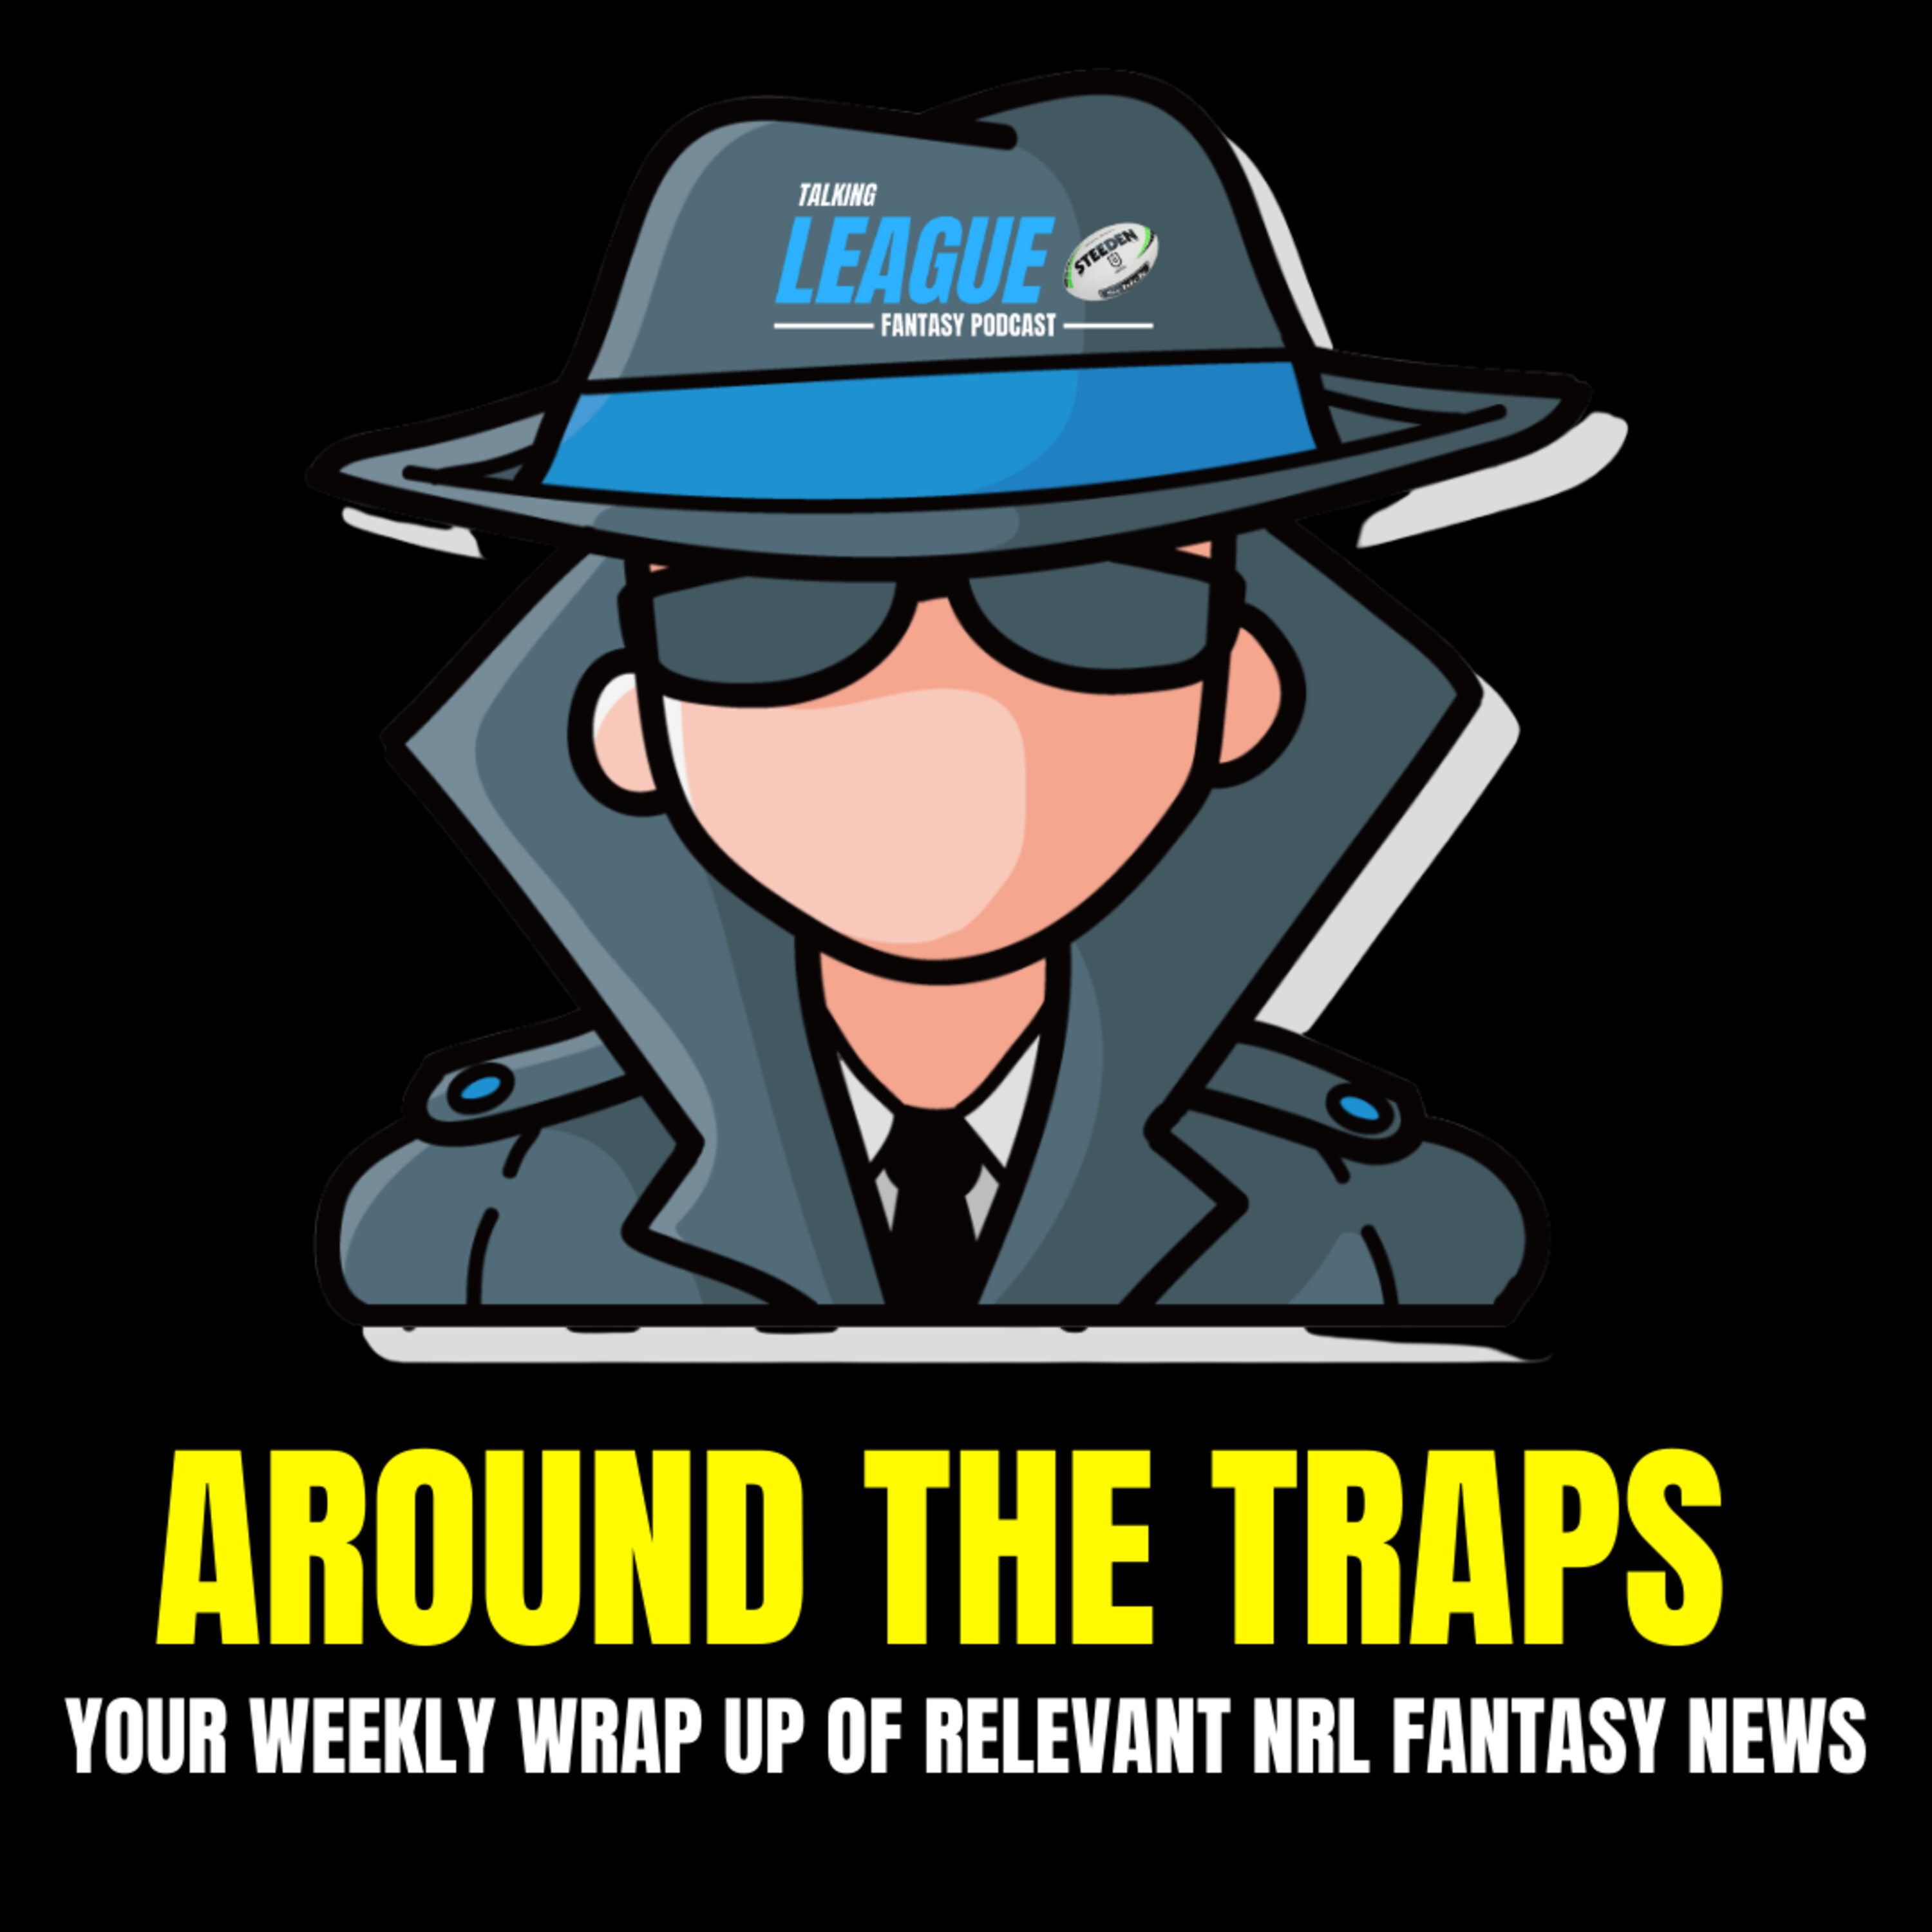 Around the Traps - your weekly wrap up of relevant NRL Fantasy news